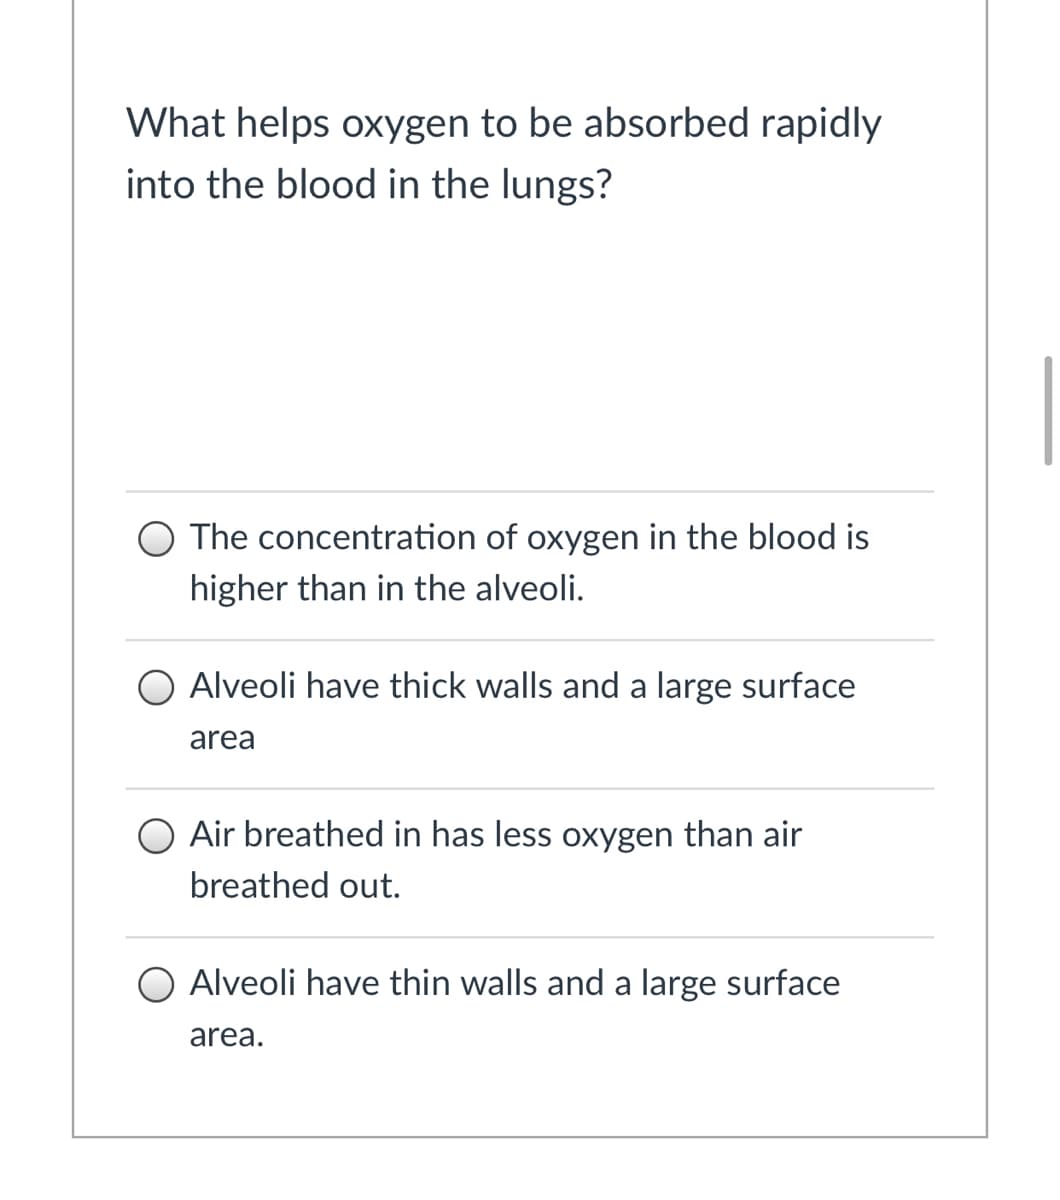 What helps oxygen to be absorbed rapidly
into the blood in the lungs?
The concentration of oxygen in the blood is
higher than in the alveoli.
O Alveoli have thick walls and a large surface
area
Air breathed in has less oxygen than air
breathed out.
Alveoli have thin walls and a large surface
area.
